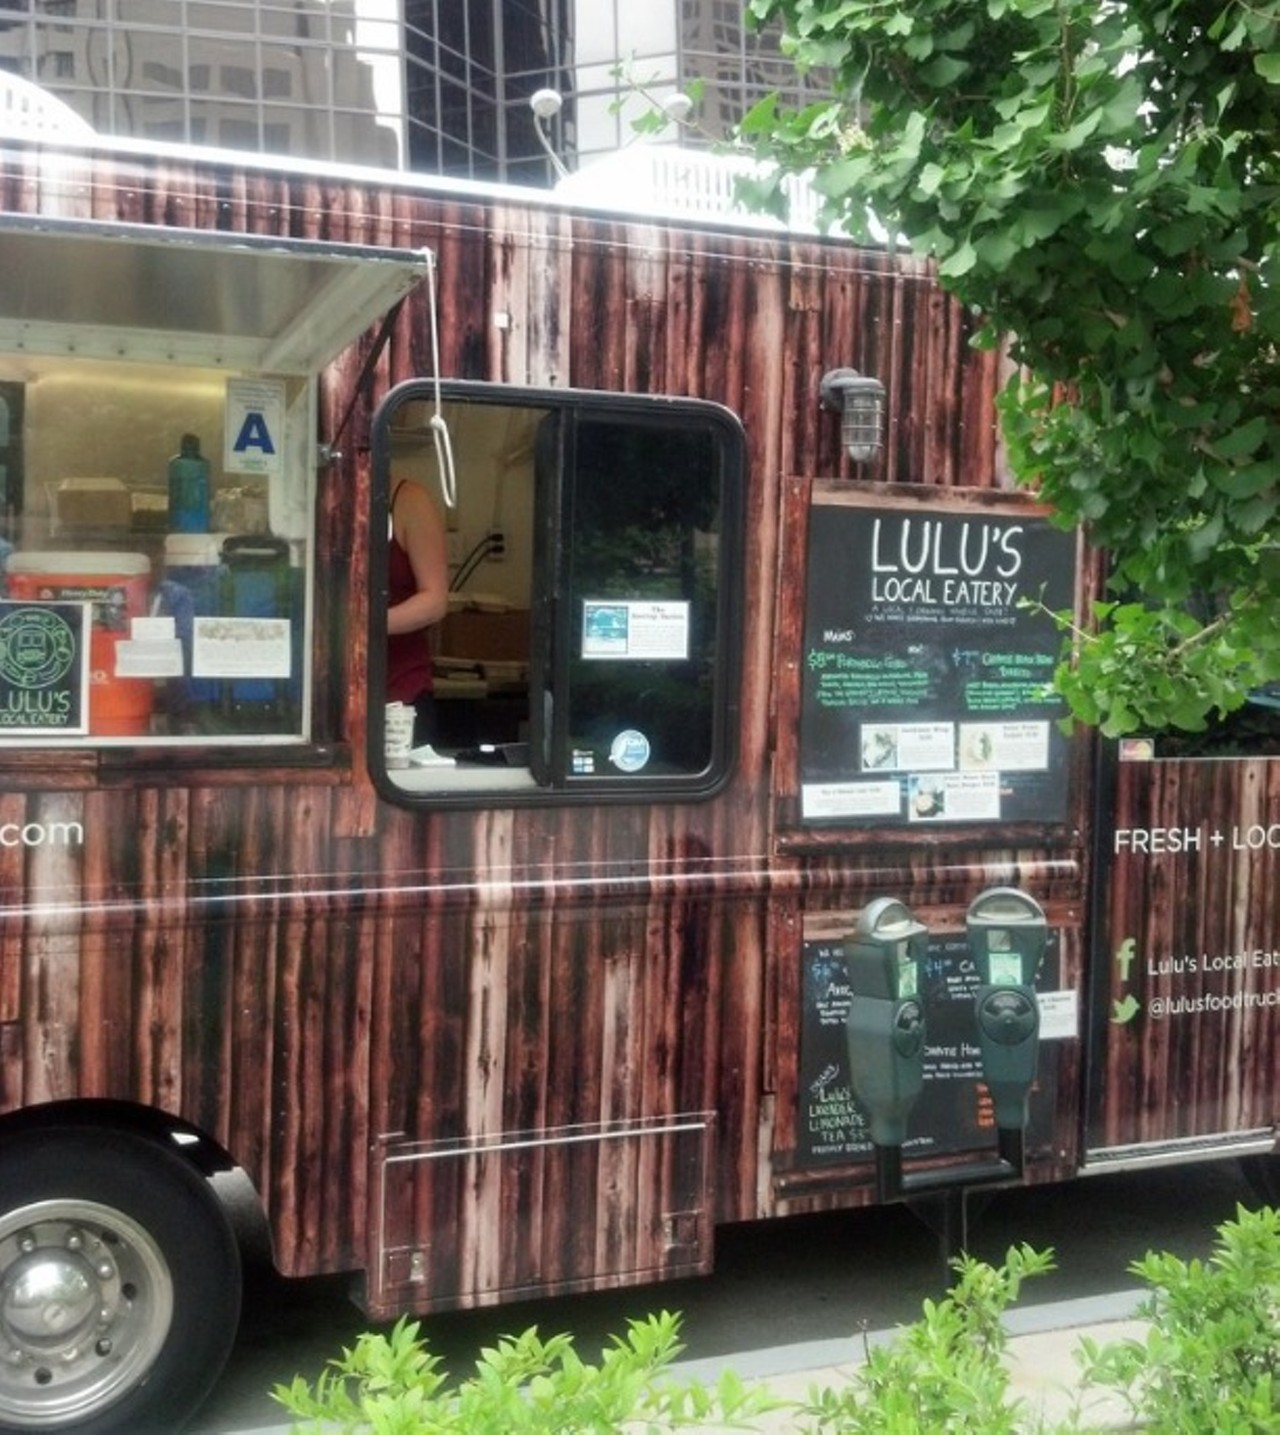 Lulu's Local Eatery
@lulusfoodtruck
Guess what: healthy, organic food can taste amazing. (Gasp!) Husband and wife team Robert Tucker and Lauren Loomis were inspired to create Lulu's Local Eatery while working on organic farms in New Zealand and Australia. Photo courtesy of Yelp / Adria Nicole W.